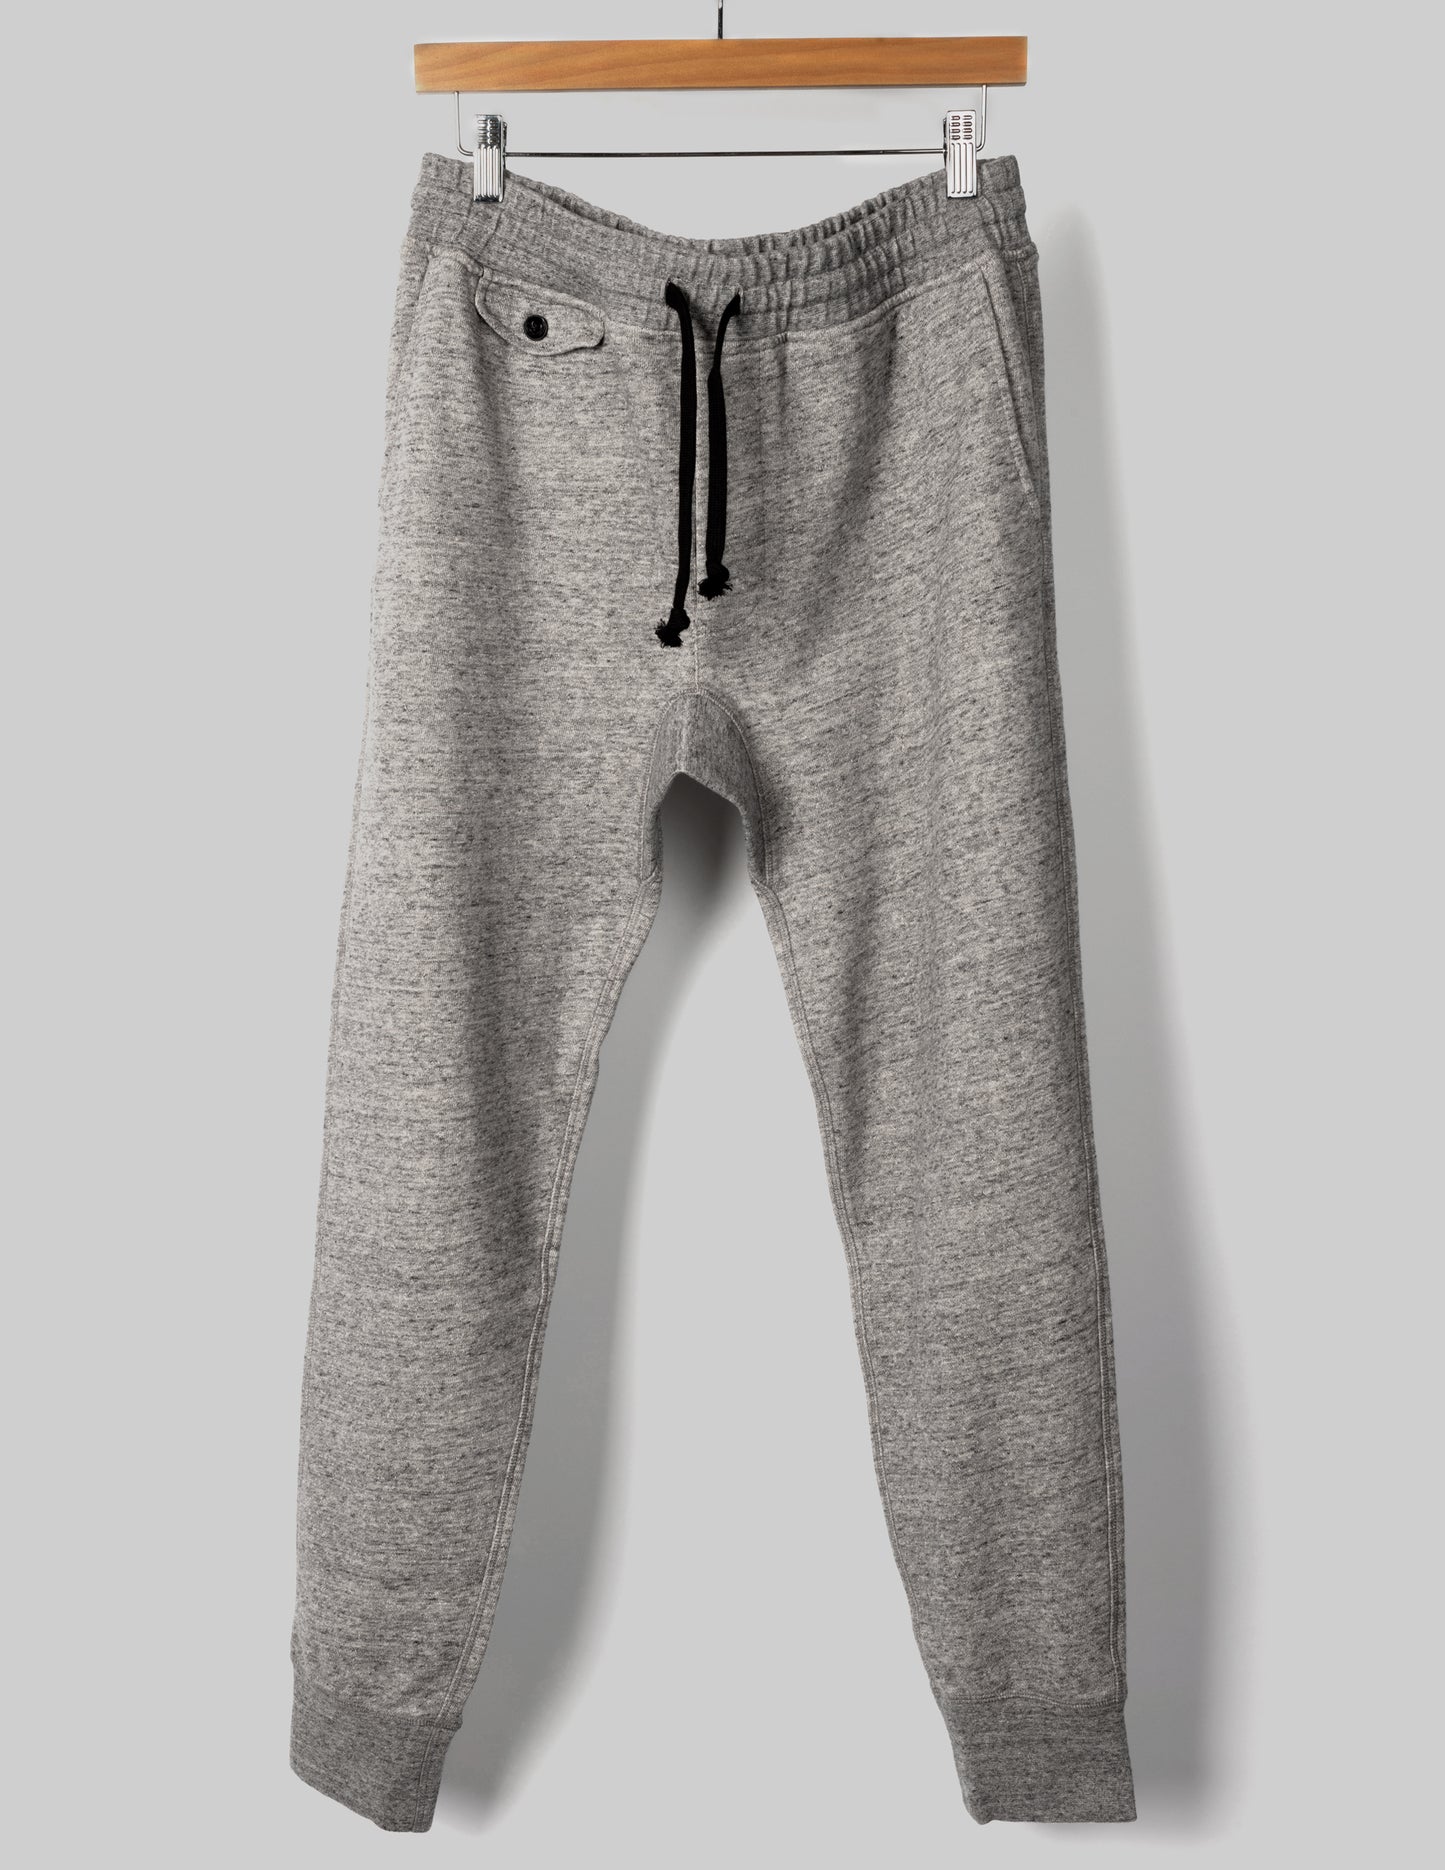 Fields French Terry Sweatpants in Grey Heather